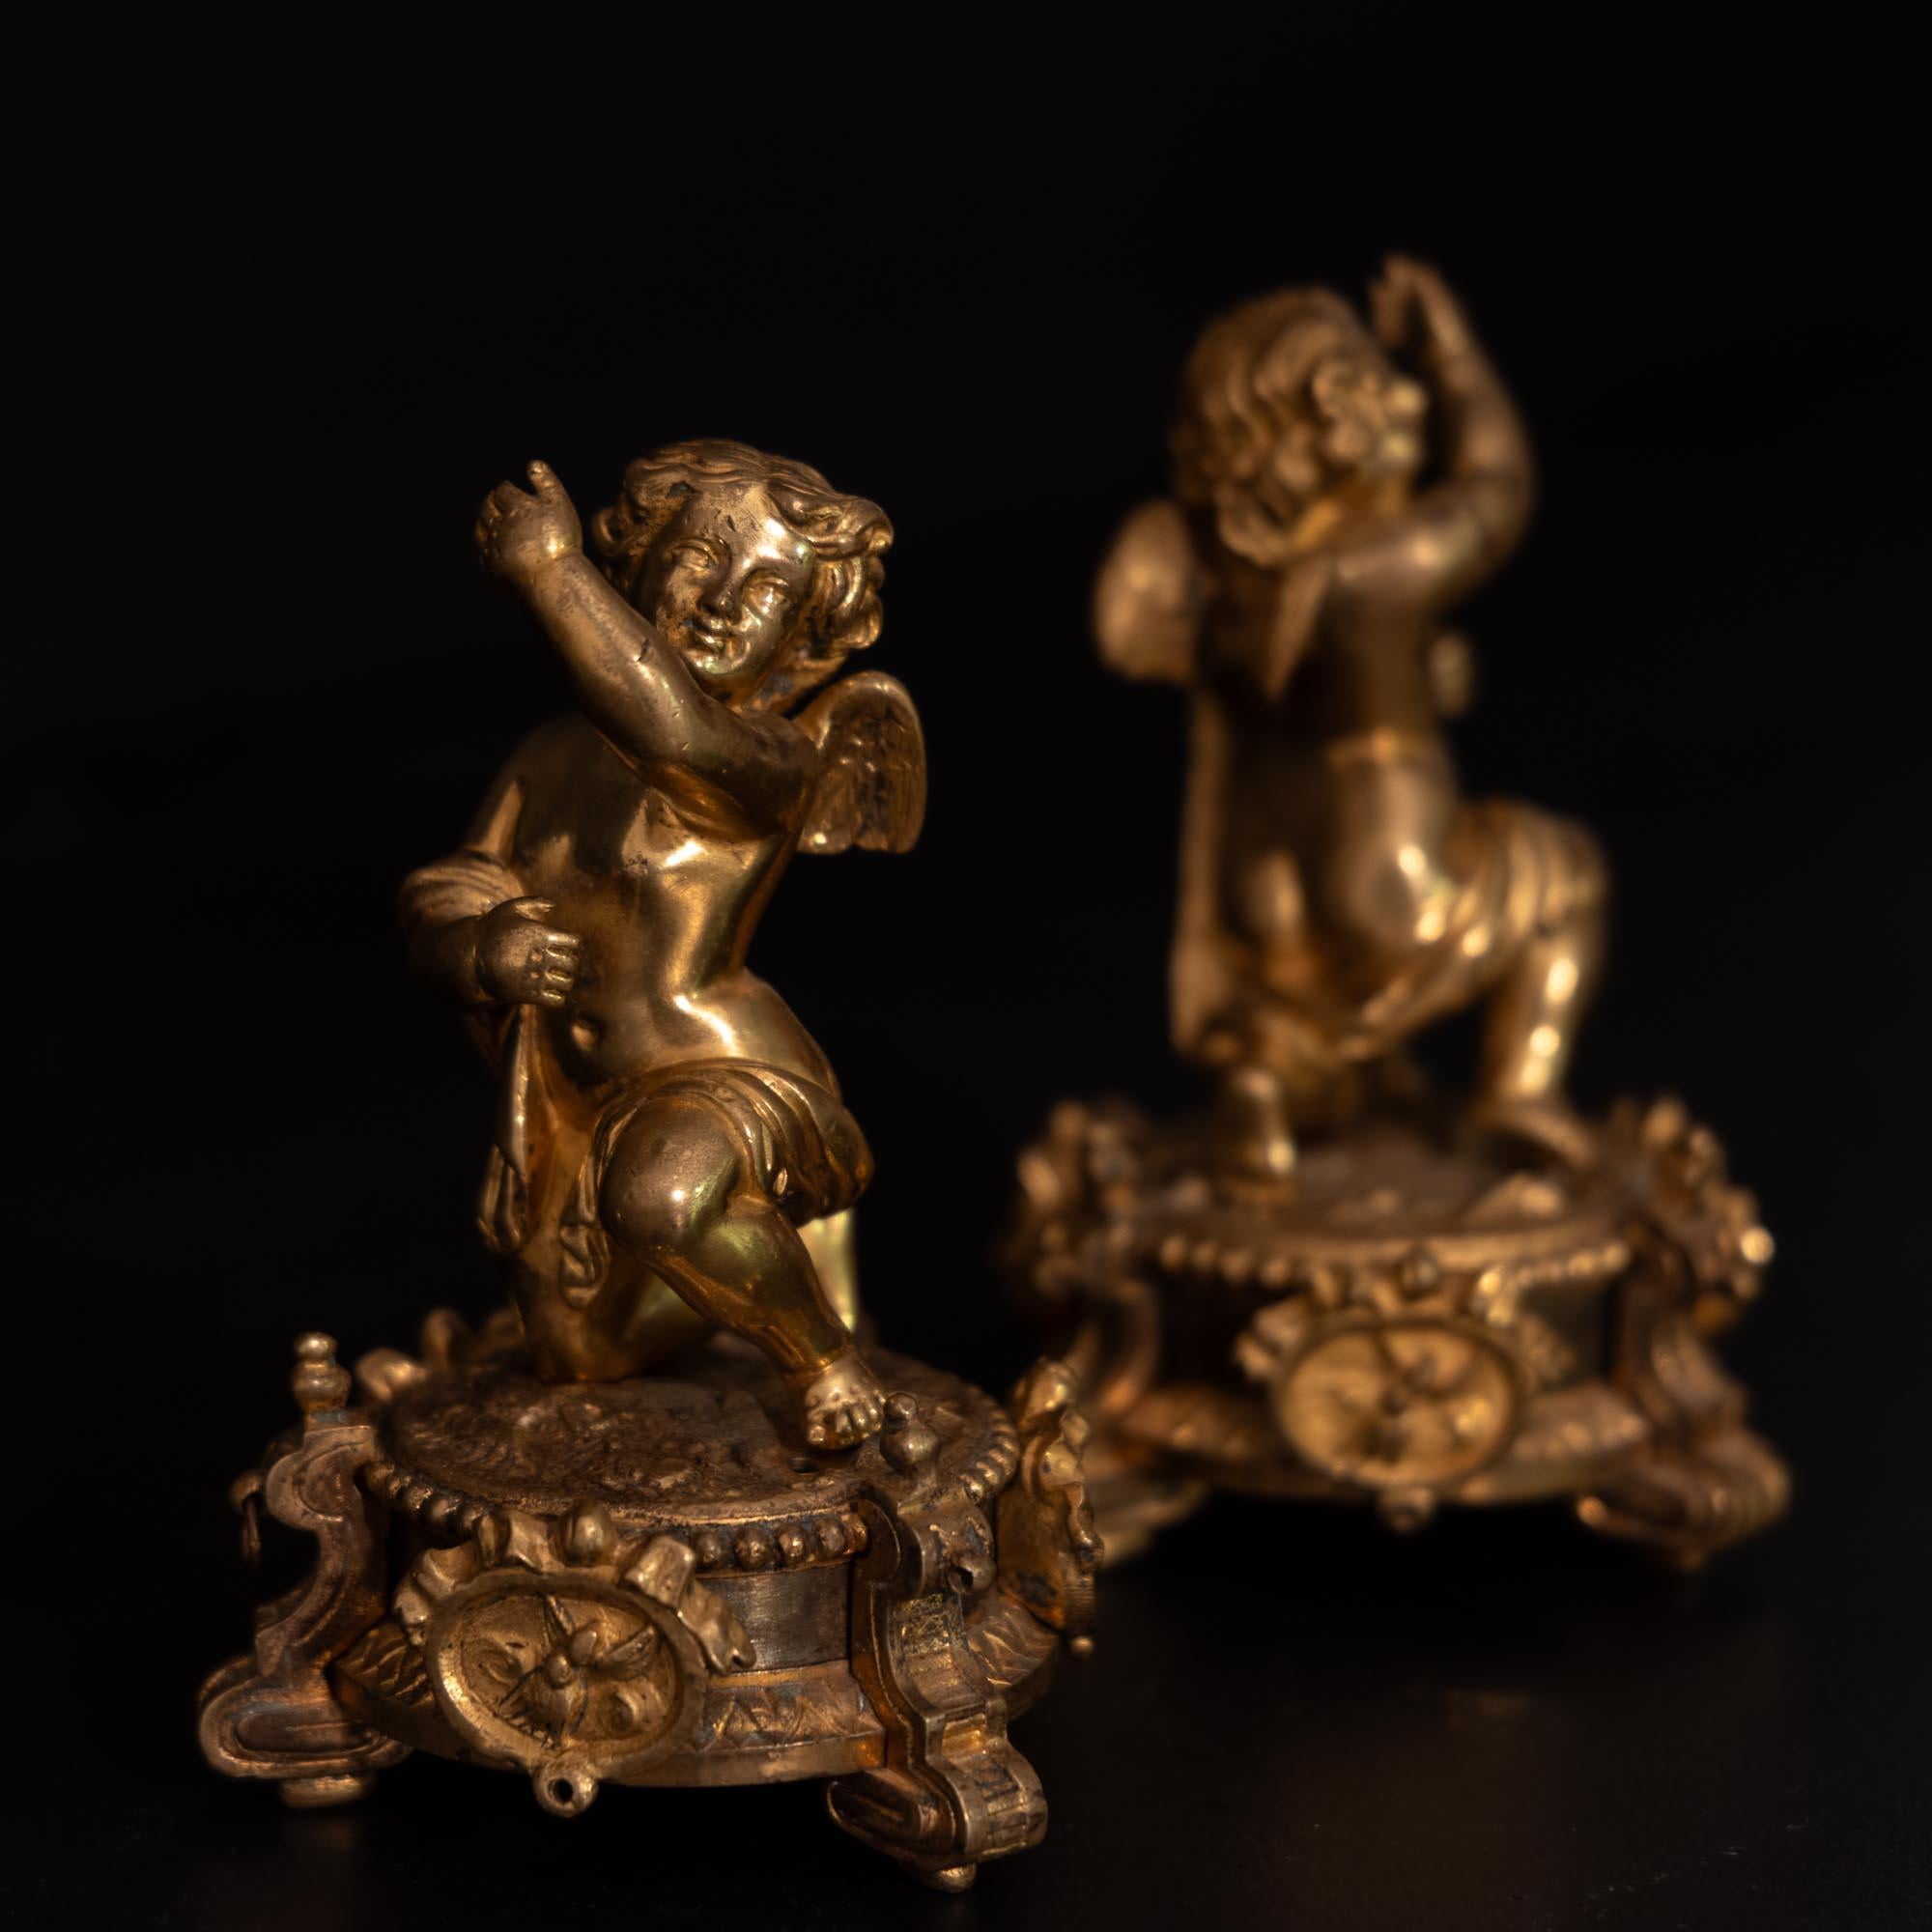 Pair of gilt bronzes in the form of winged putti with raised arms and opposite design. The putti stand on round bases with volute finials, pearl staff and medallions. The putti originally carried something in their arms, a small hole in the base of